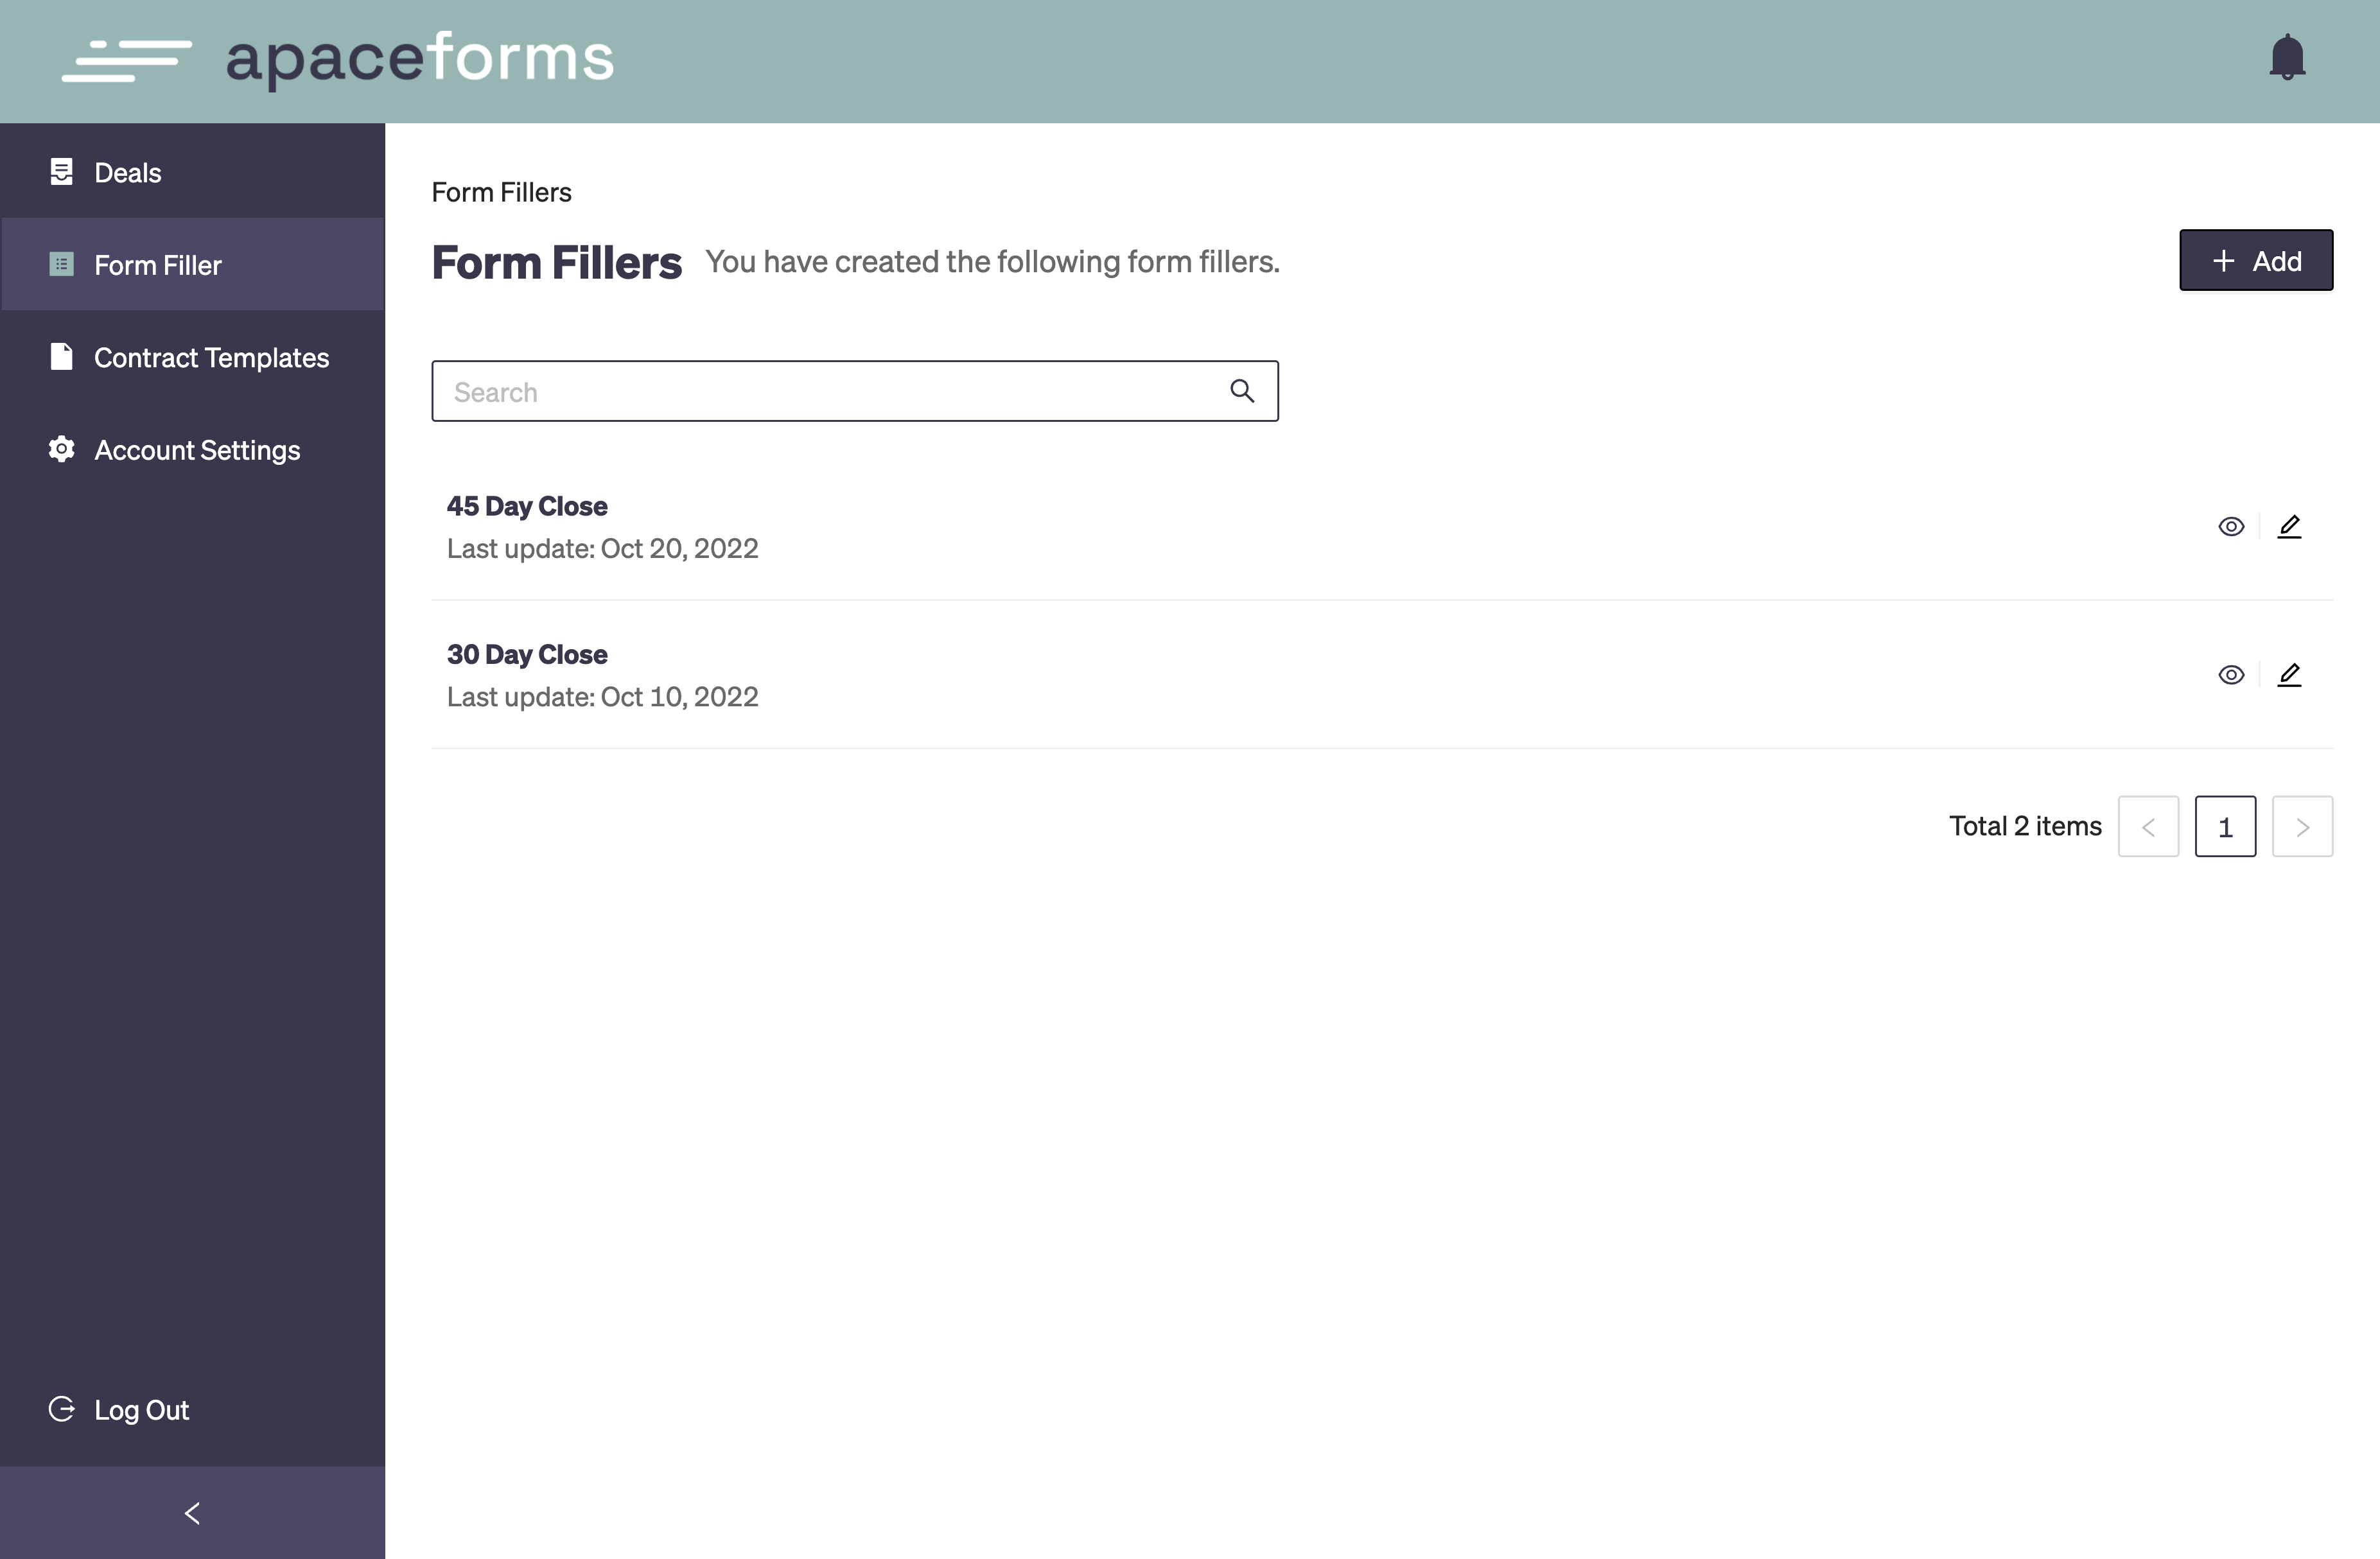 Form Fillers are your way of telling Apace how you want it to calculate the date within your Contract Templates. Click this tab to get started